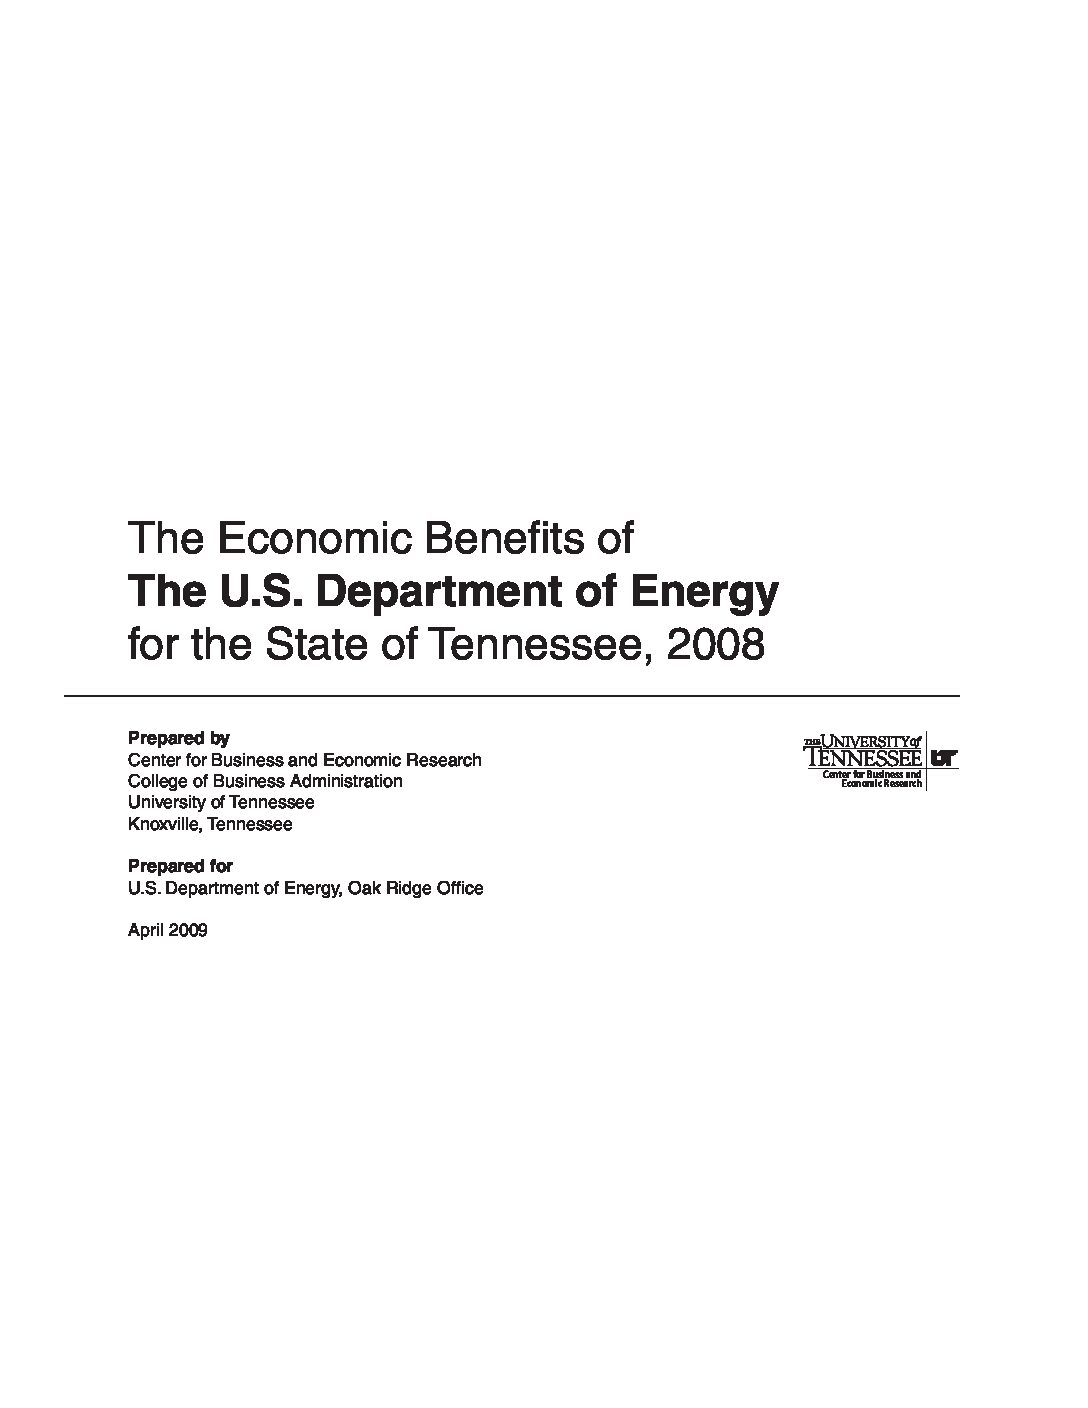 The Economic Benefits of the U.S. Department of Energy for the State of Tennessee, 2008